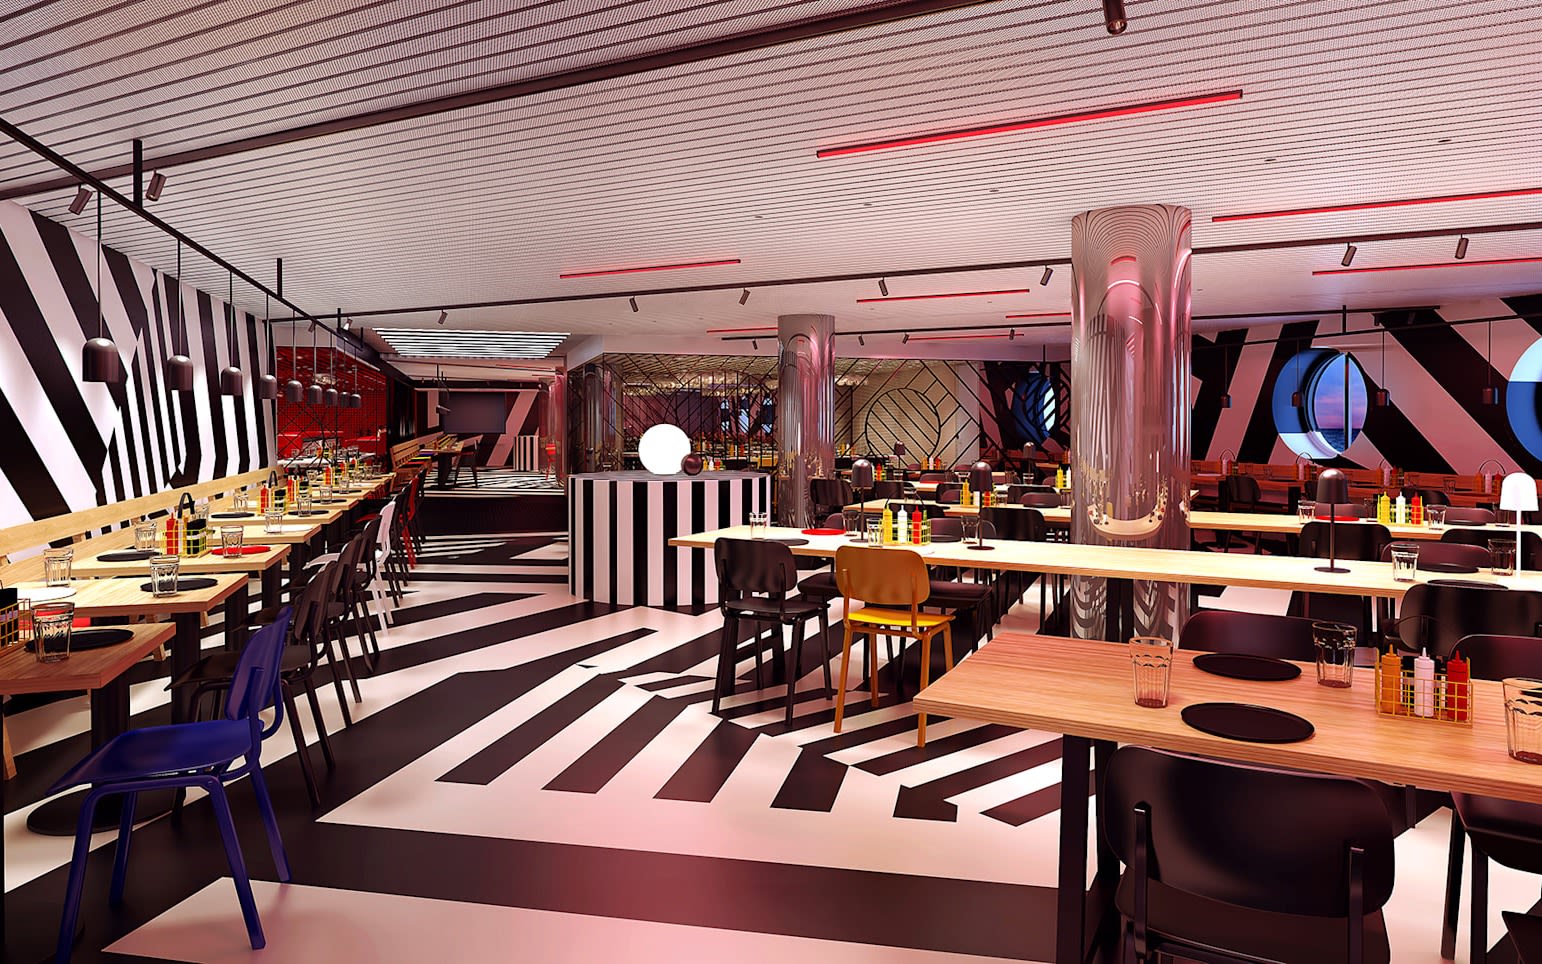 The inside of a casual dining restaurant with black and white stripes on the floors, ceiling and walls